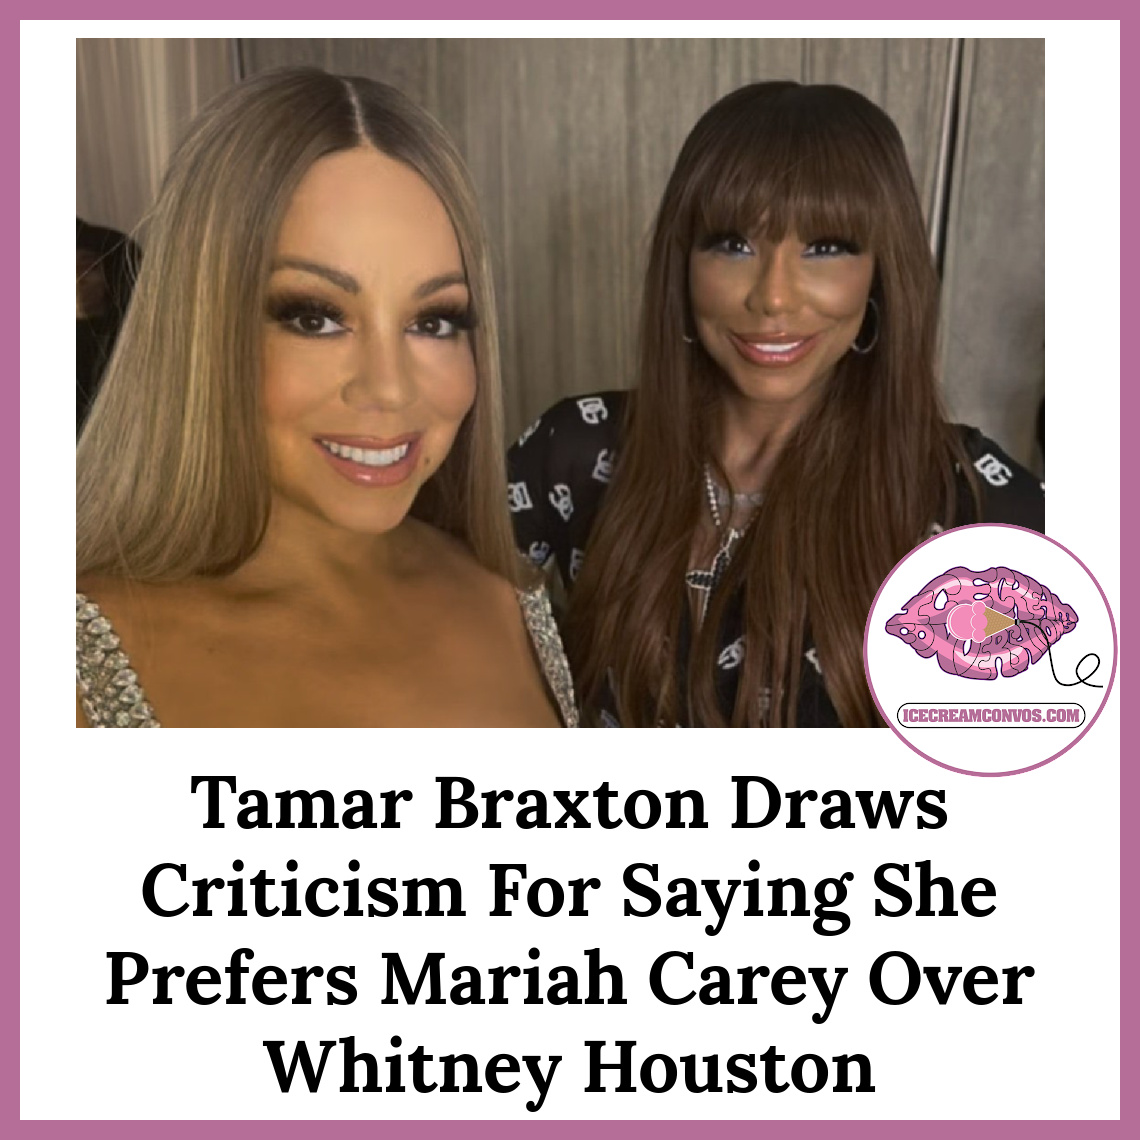 Tamar Braxton drew criticism after saying that she prefers Mariah Carey and she's 'never been a huge Whitney fan like that.'🎶🖤🍦 bit.ly/3JJ2nU2

#TamarBraxton #MariahCarey #WhitneyHouston #QuickQuotes #IceCreamConvos